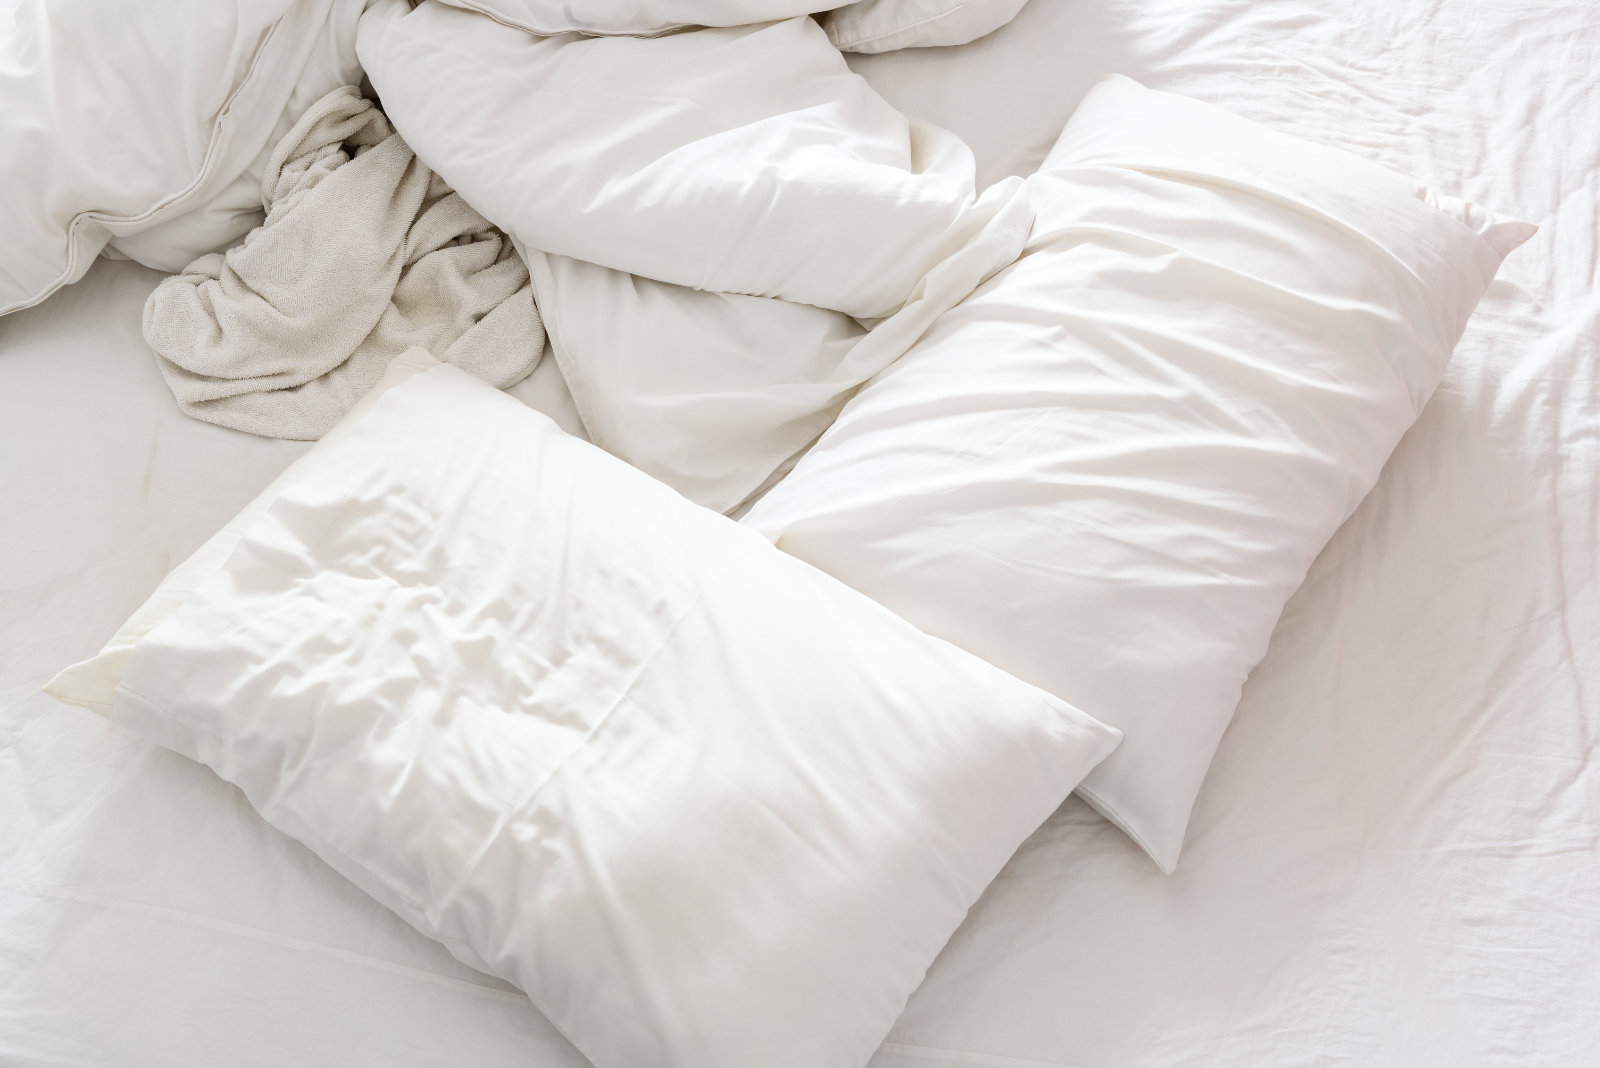 When Should You Wash Your Sheets?